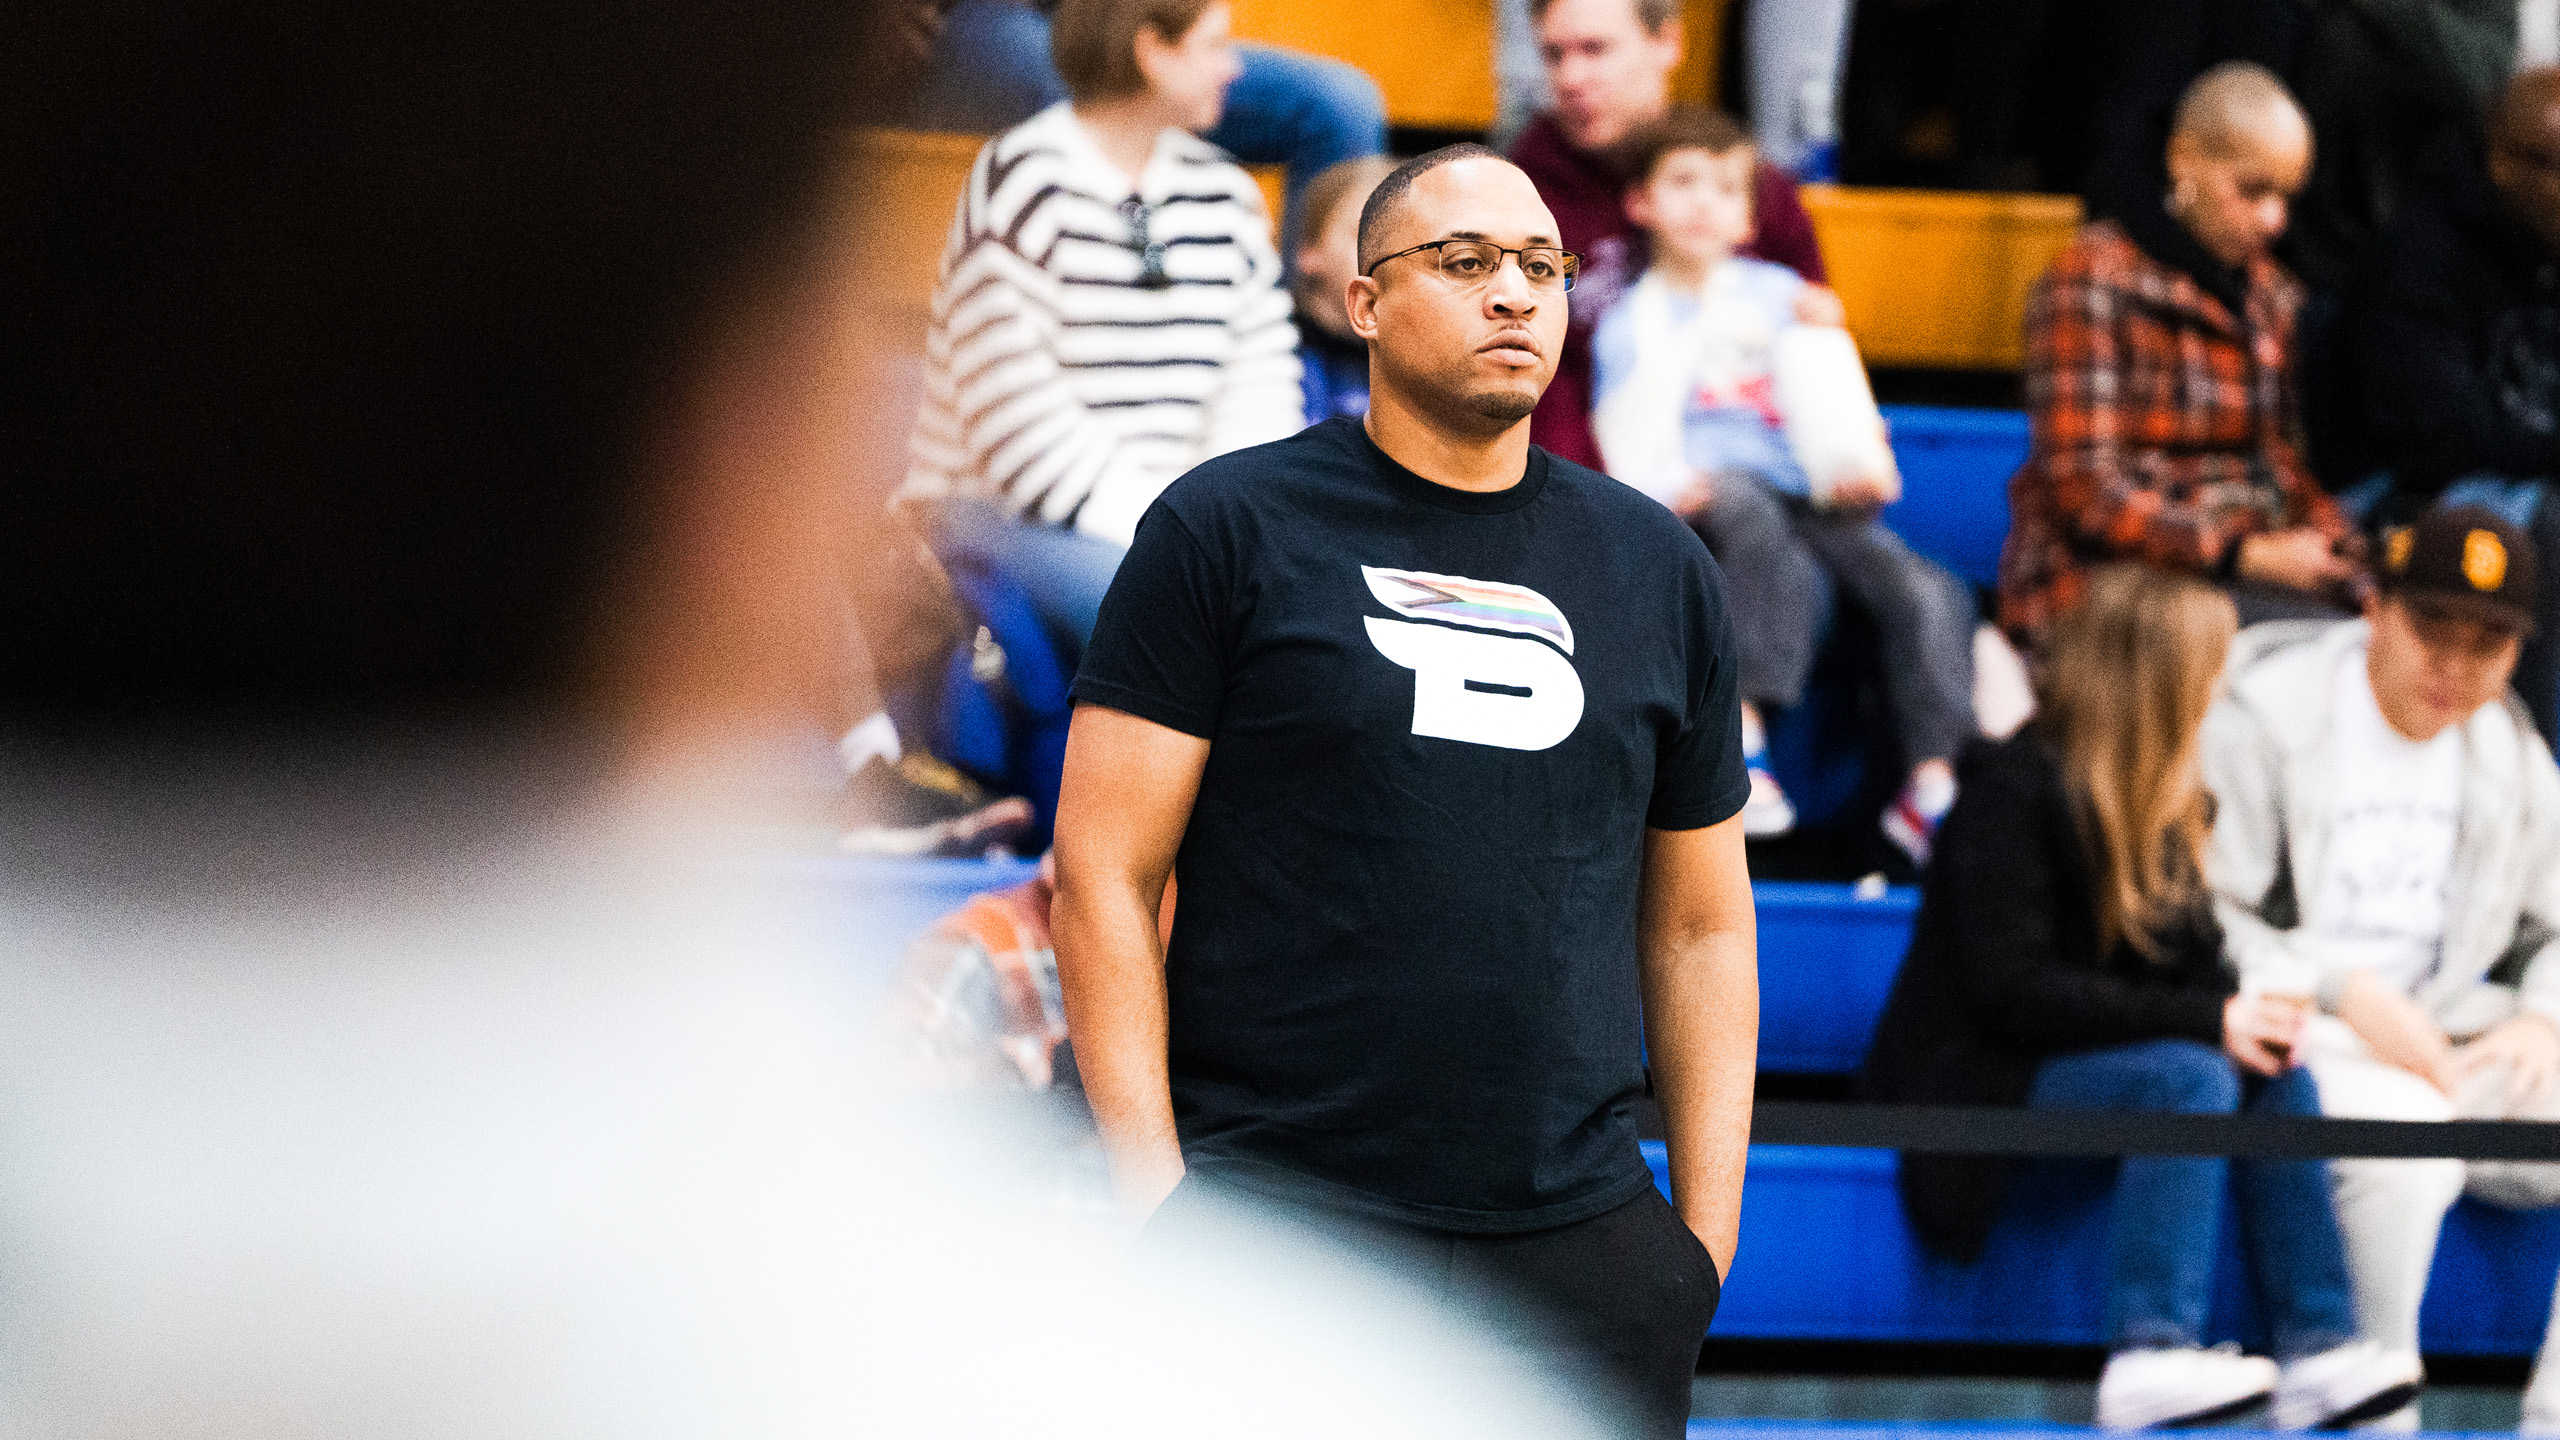 TMU men's basketball assistant coach Jeremie Kayeye stands while wearing the Bold Pride shirt